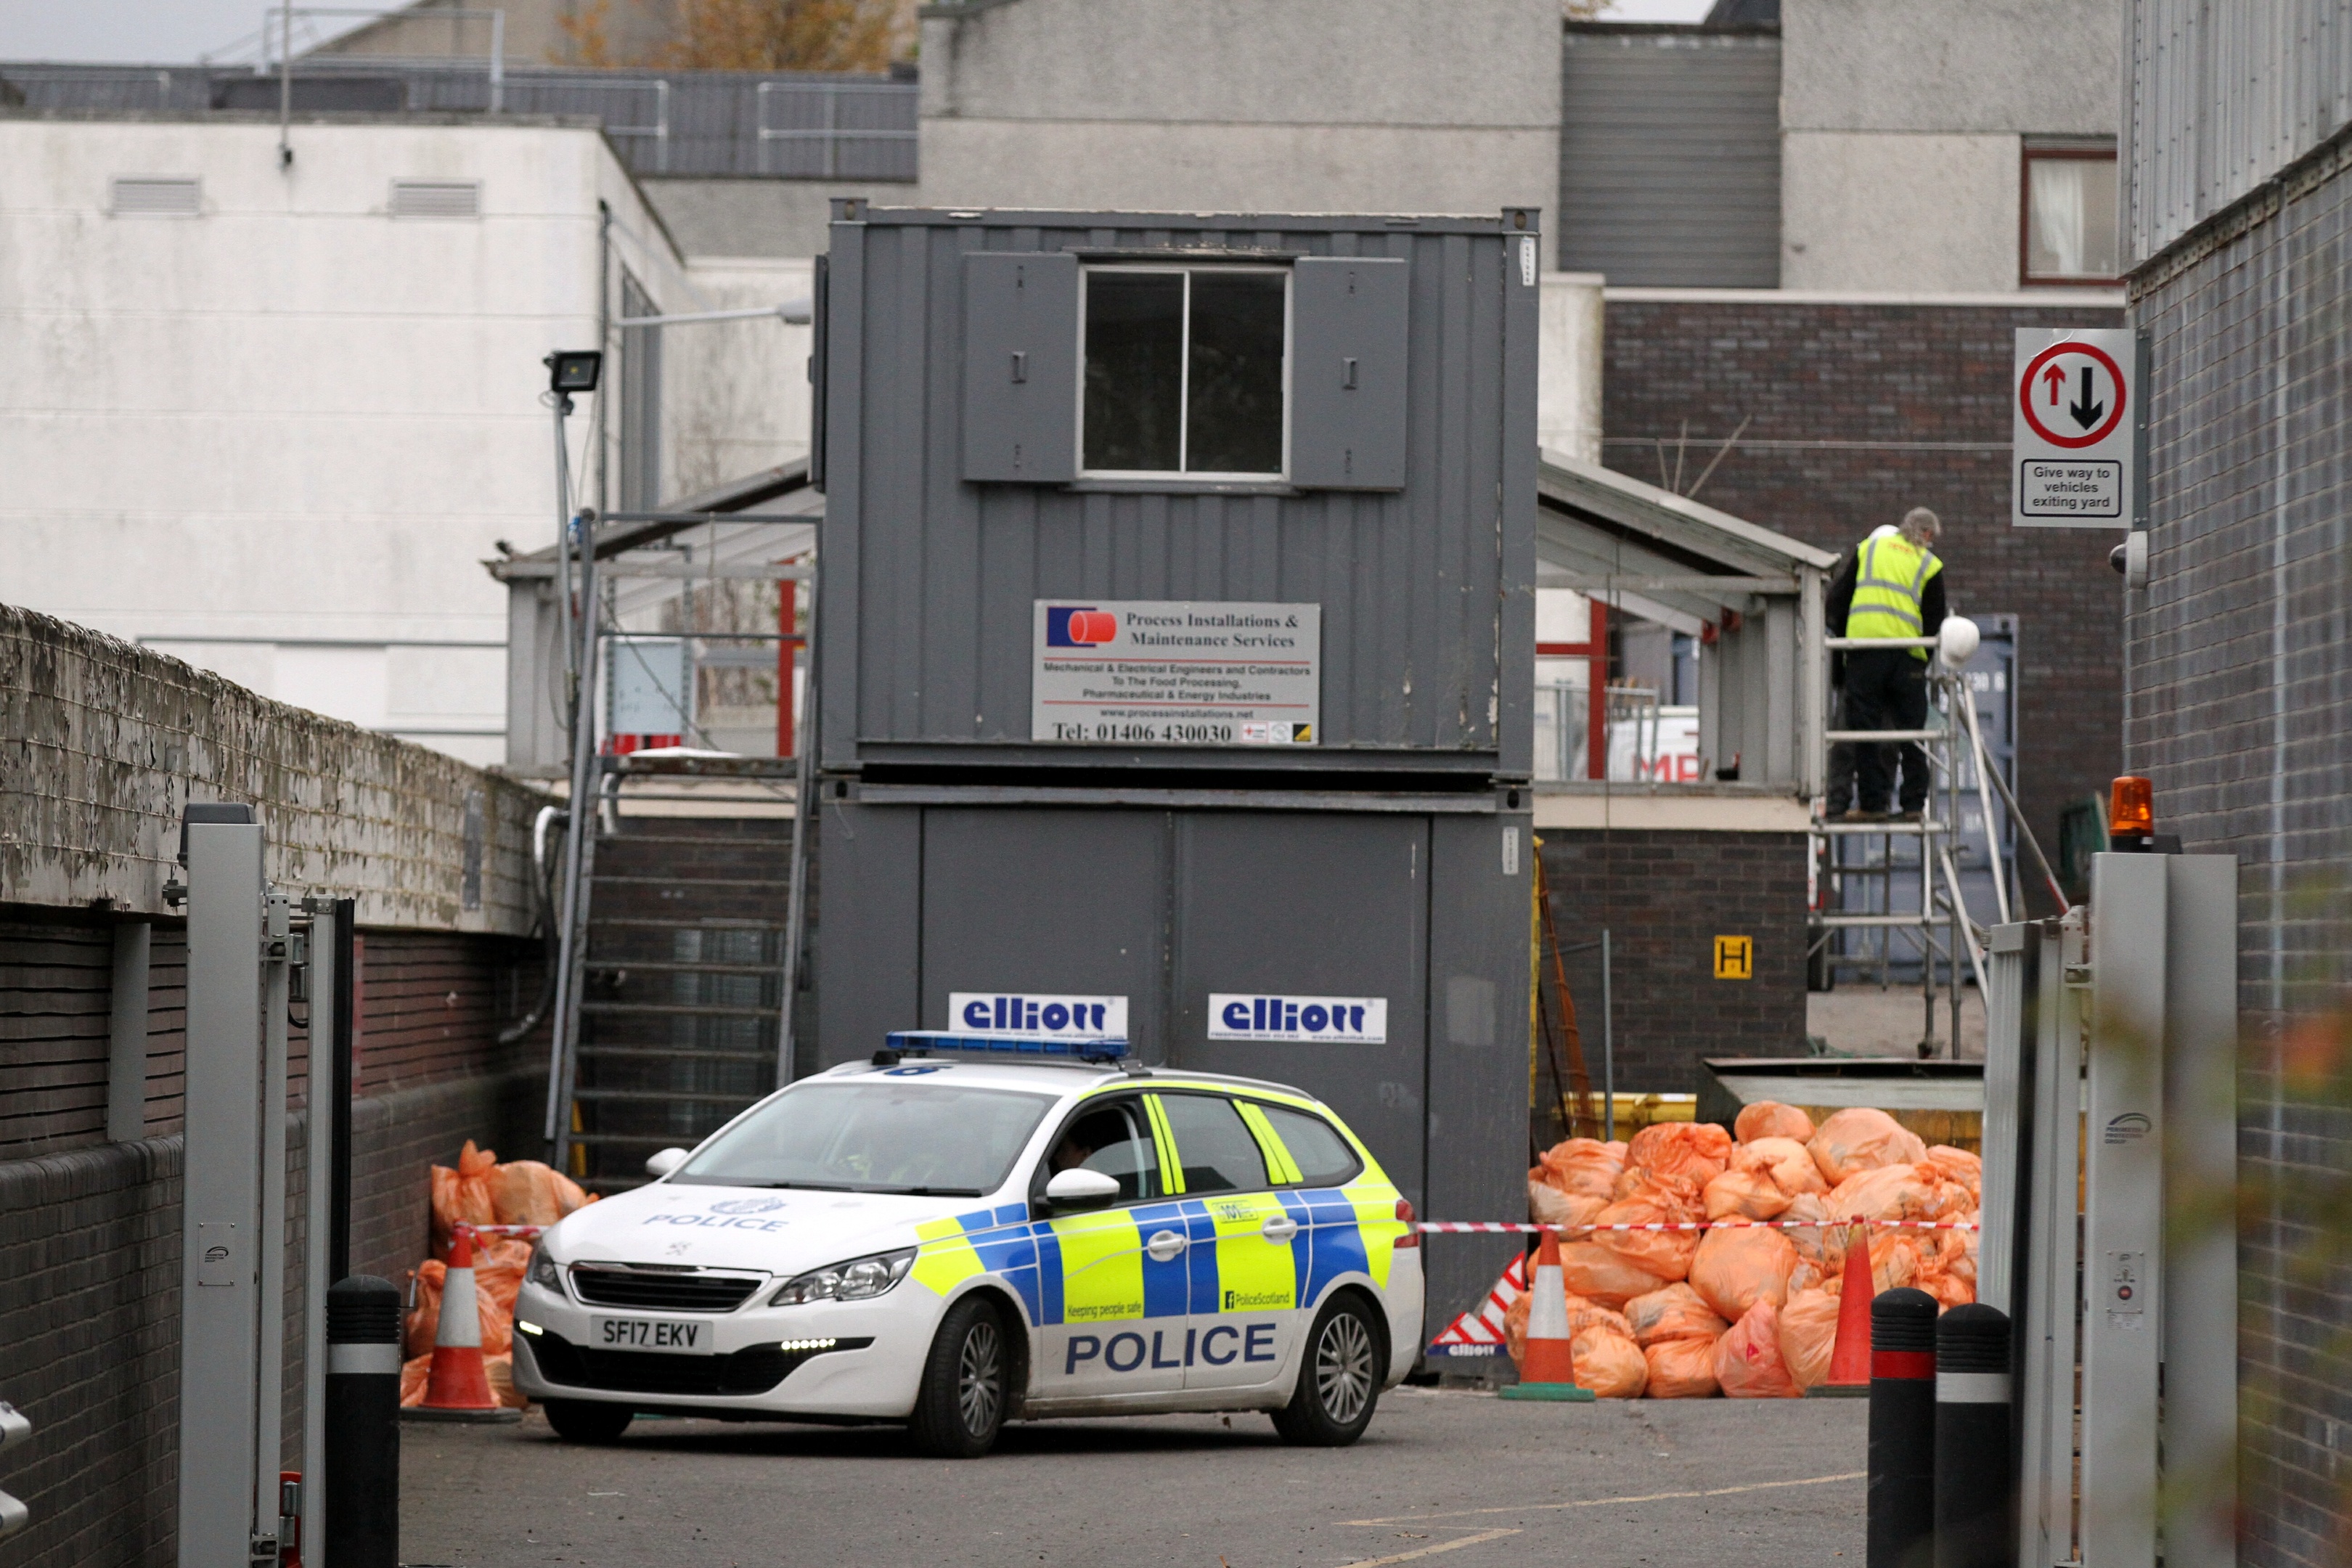 Police on the scene at Ninewells as rubbish is searched